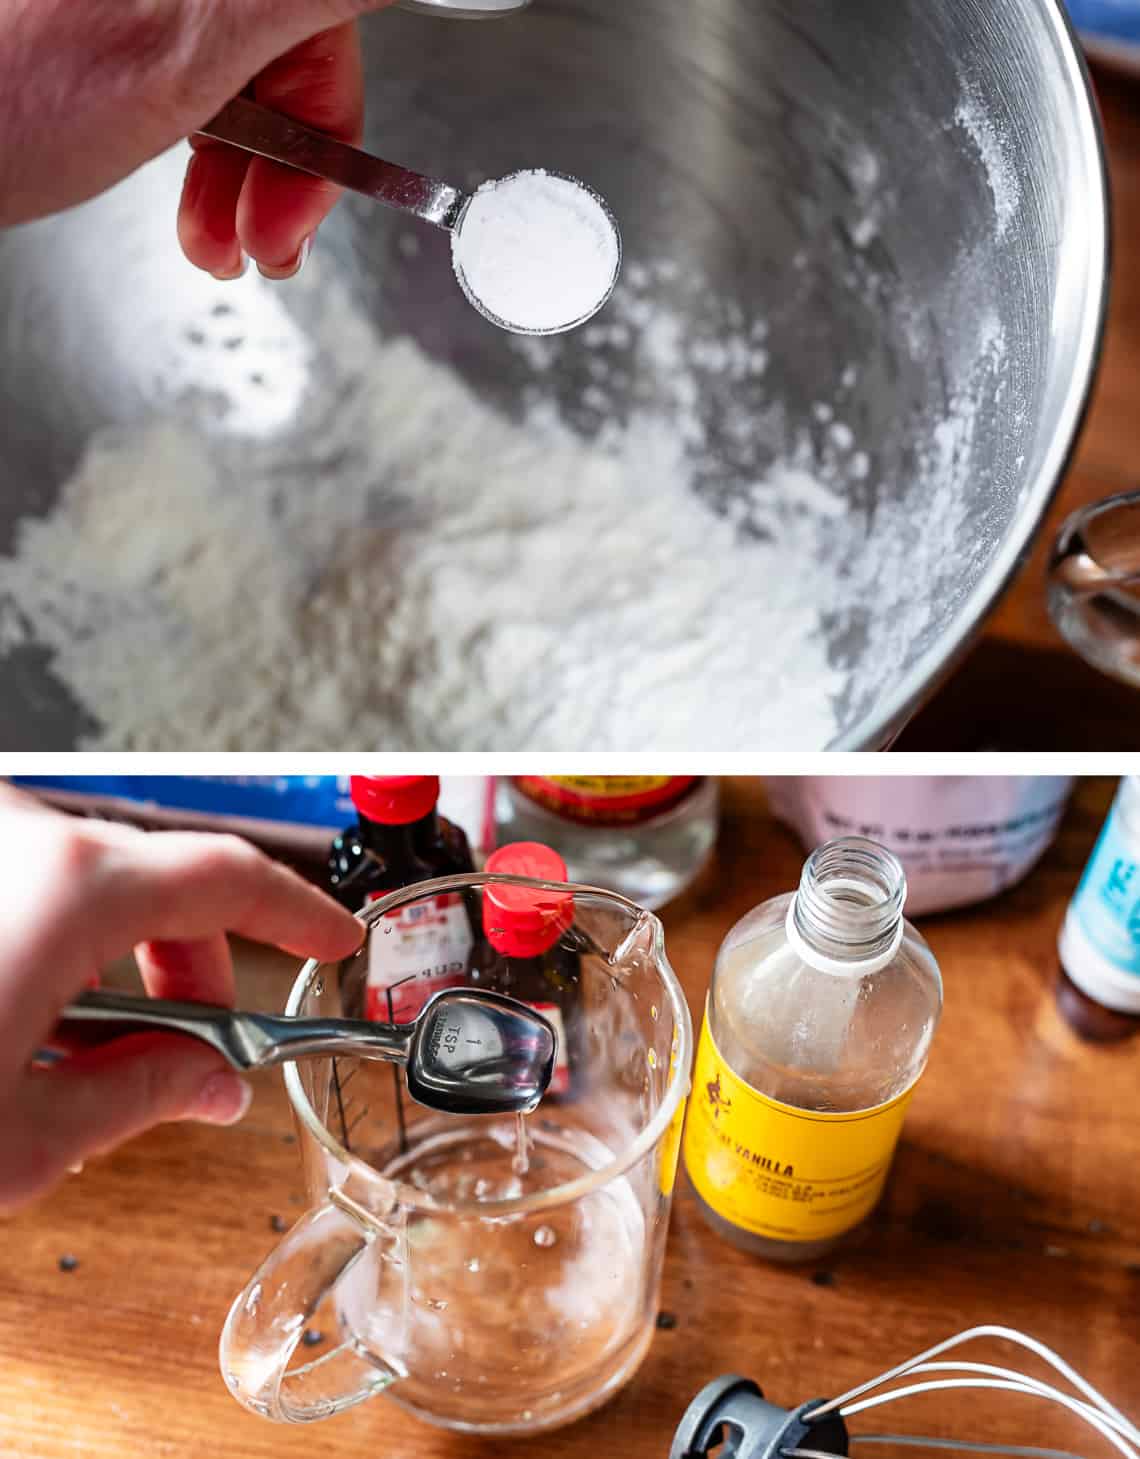 Adding teaspoon of cream of tartar to a mixing bowl of other dry ingredients.